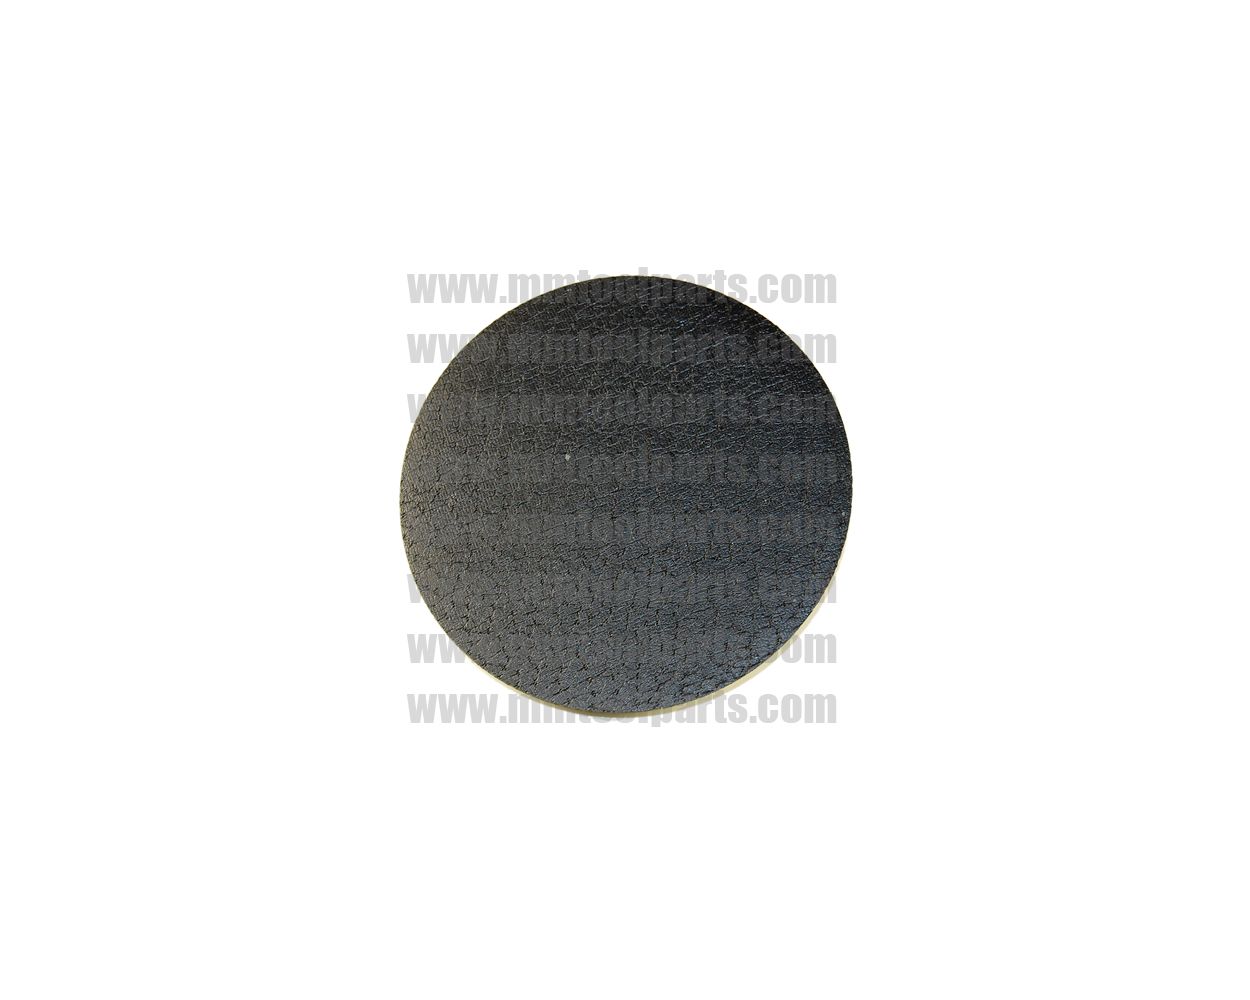 5" Replacement Sanding Pad for Porter Cable 7335 7334 Orbital Sander 13700 